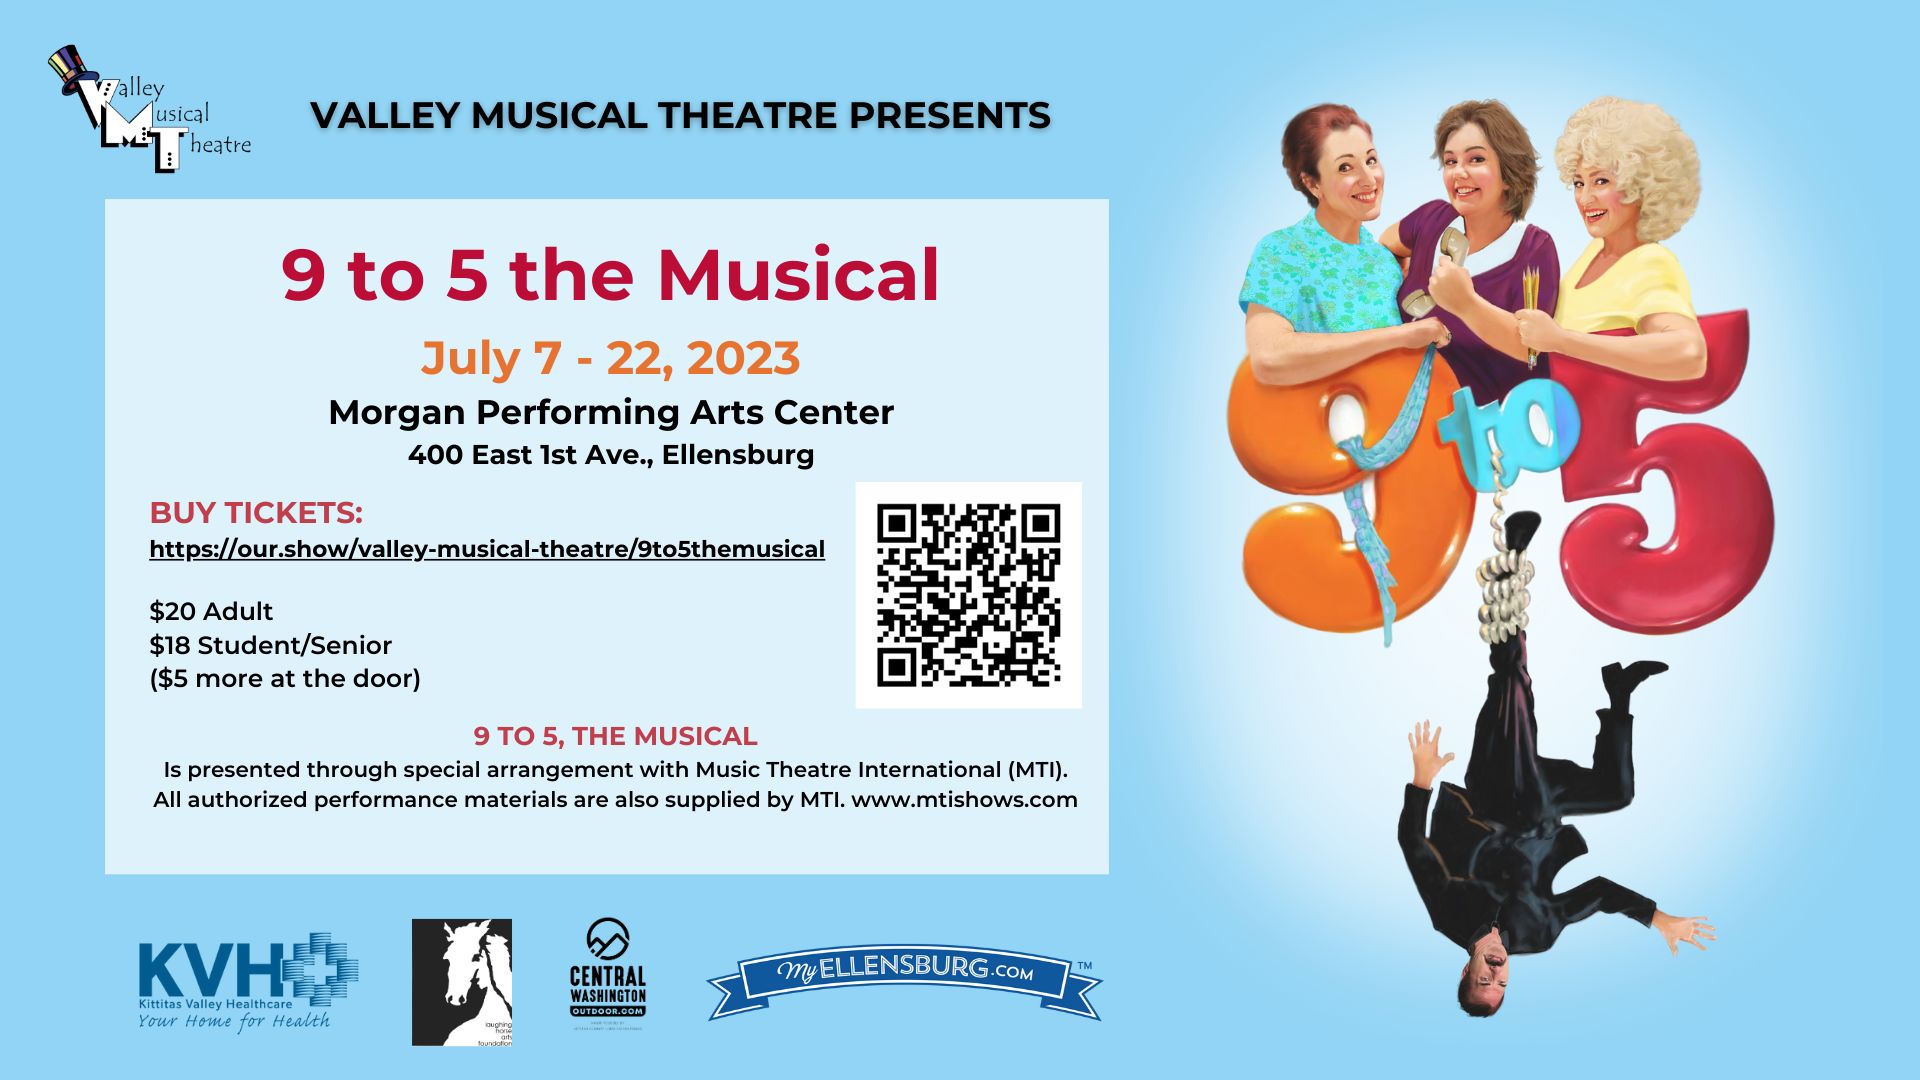 Valley Musical Theatre presents 9 to 5 the Musical, Ellensburg, Washington, United States